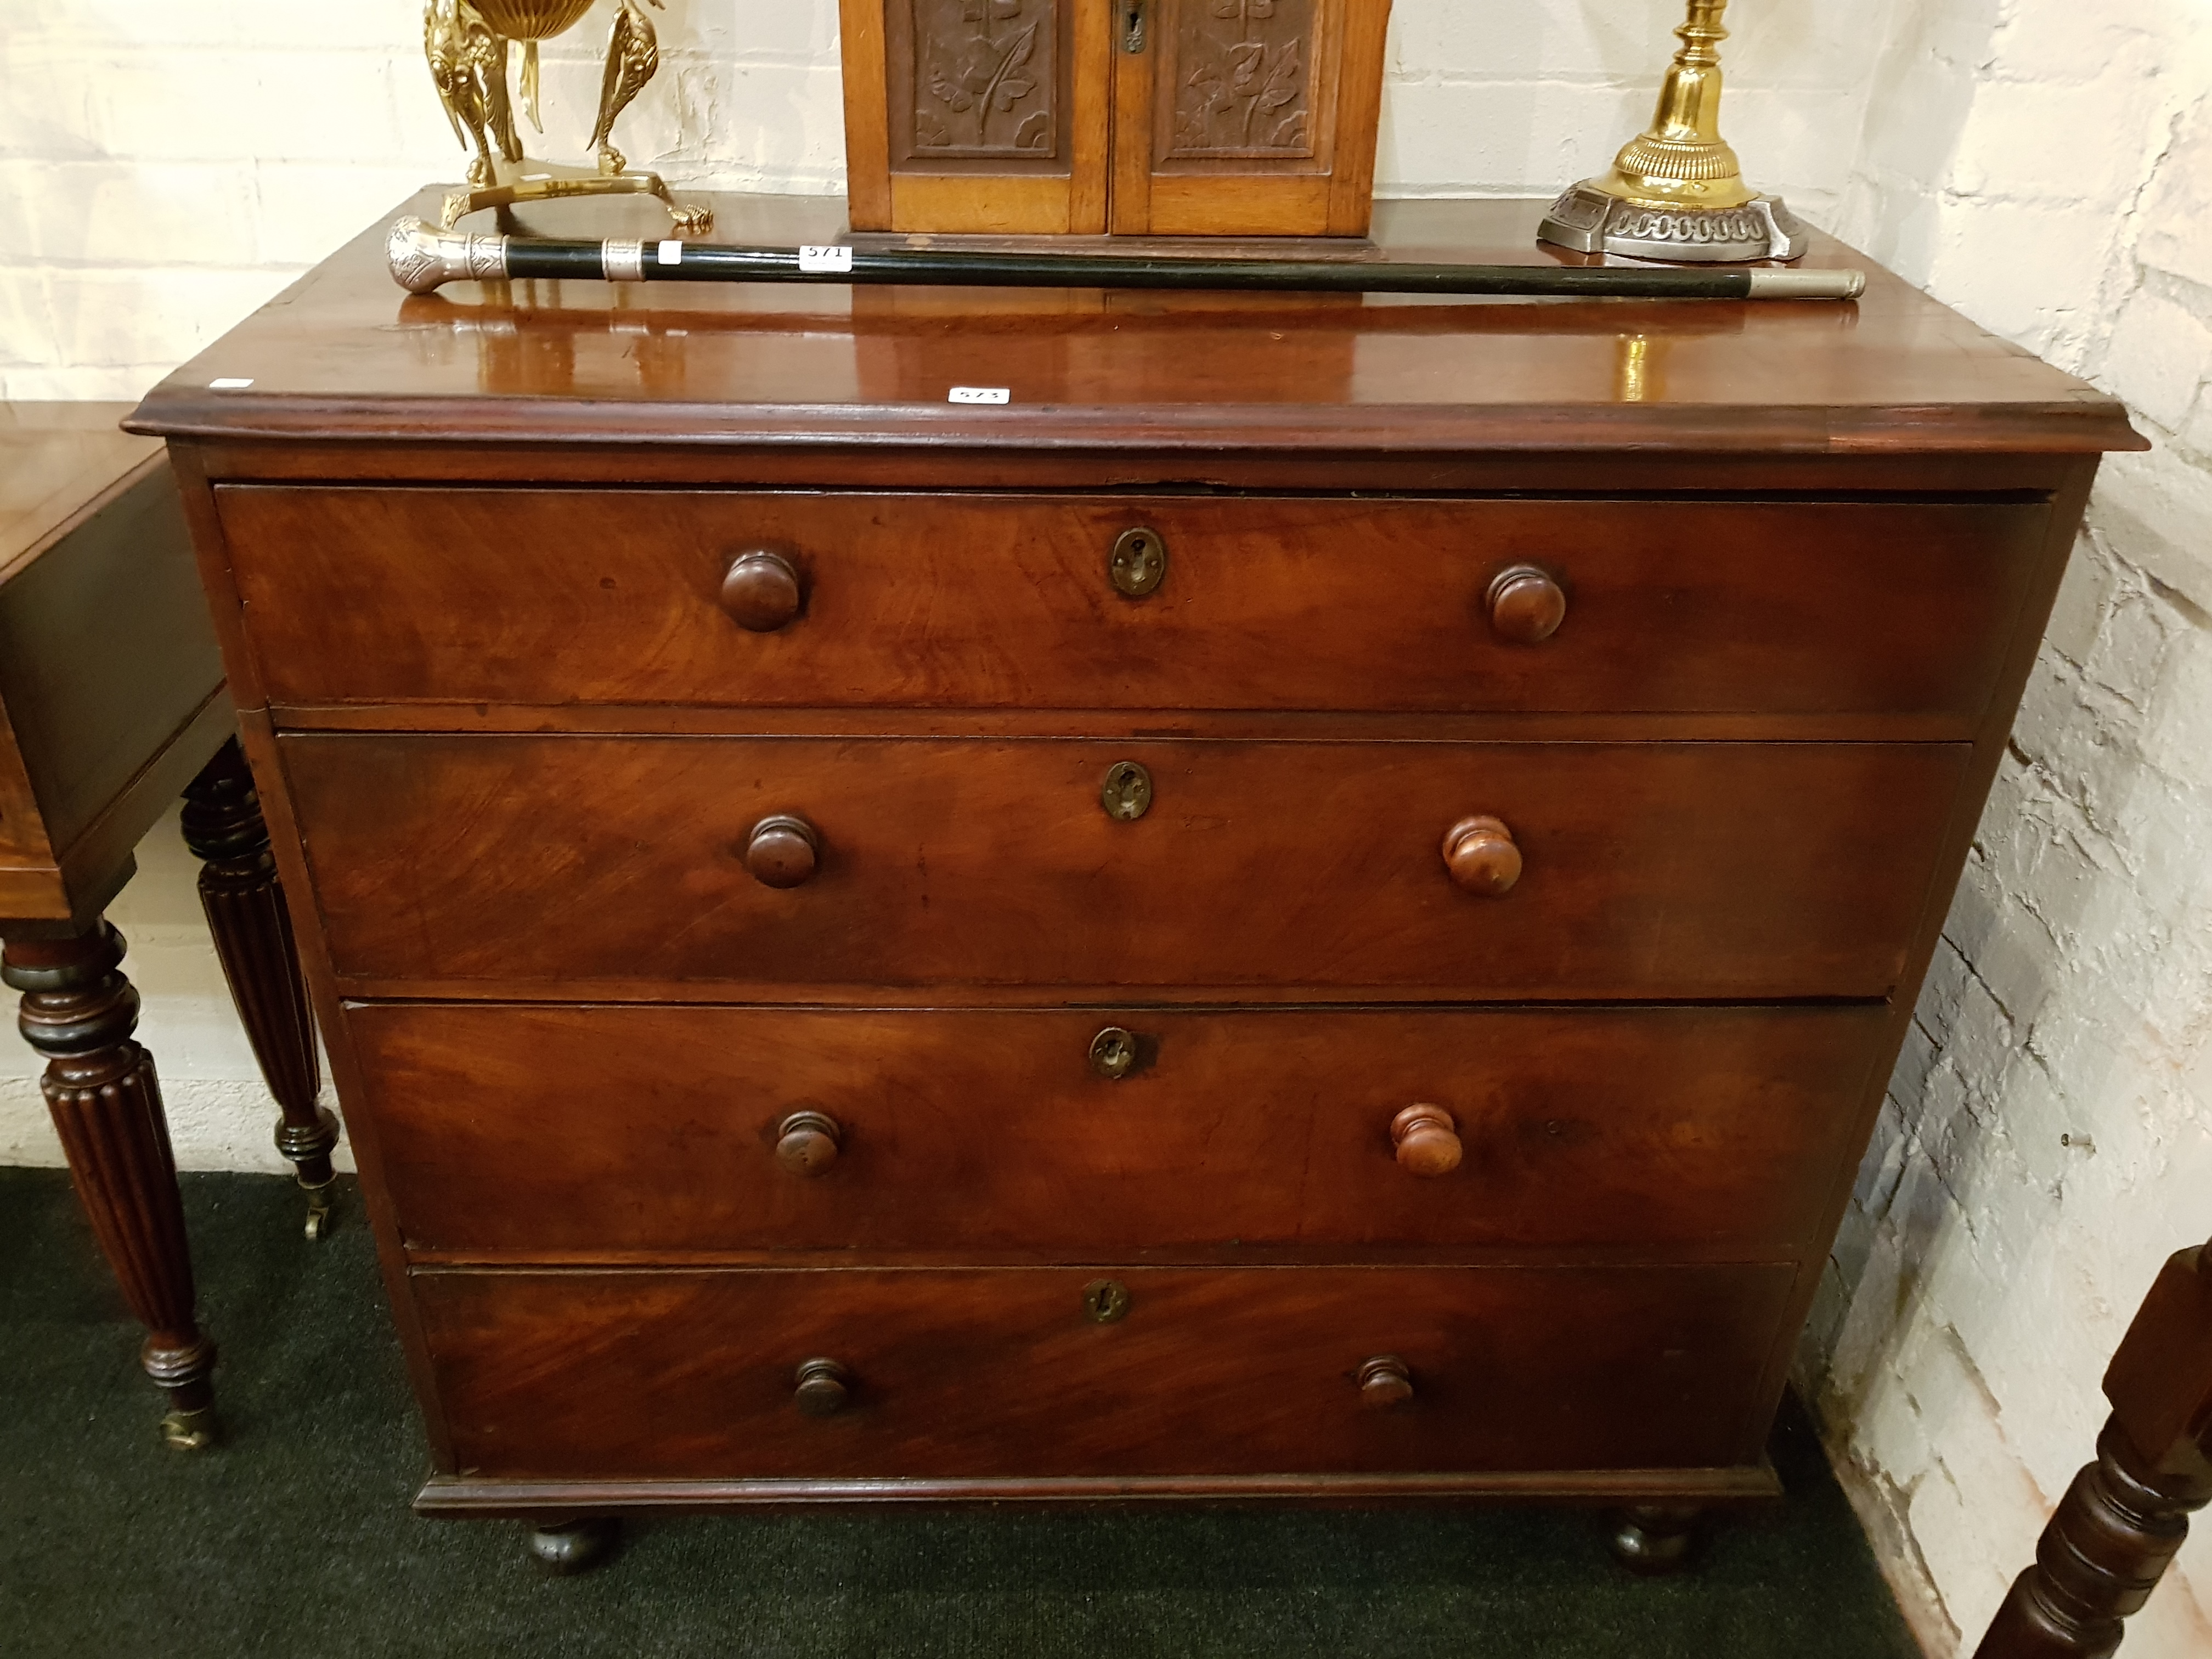 EARLY GEORGIAN MAHOGANY 4 DRAWER CHEST OF DRAWERS